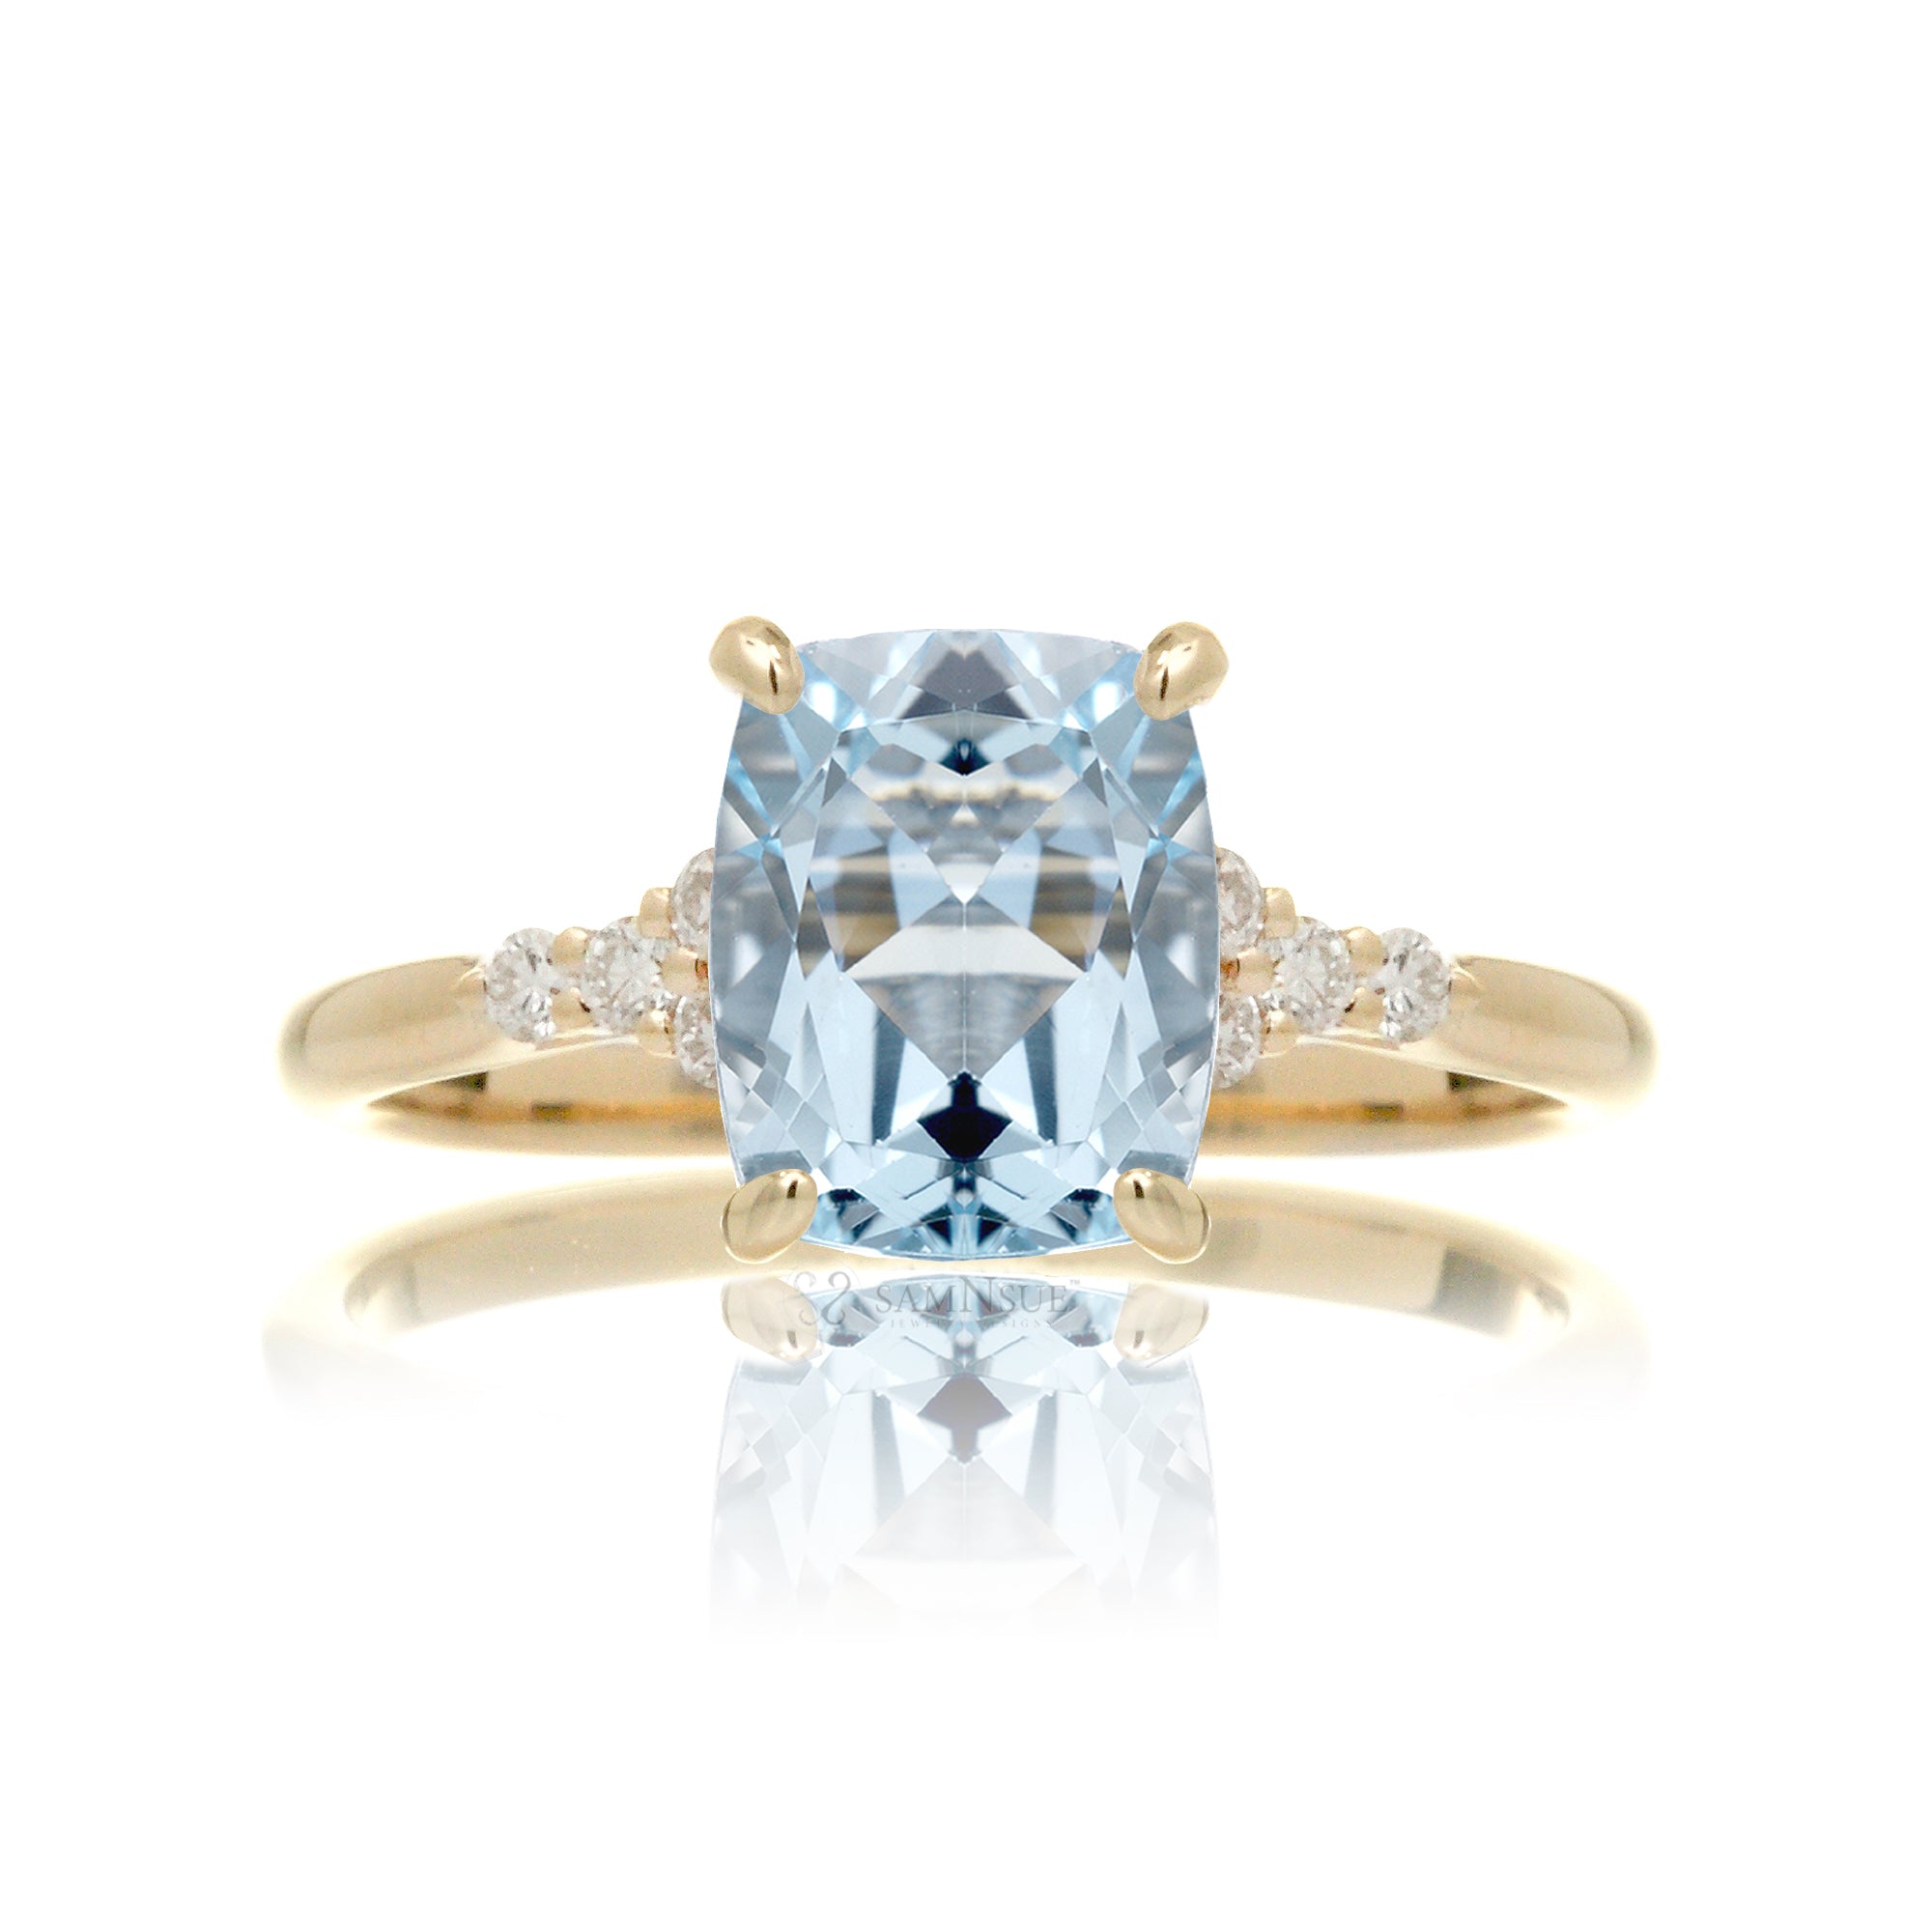 Aquamarine engagement ring cushion cut and solid band in yellow gold